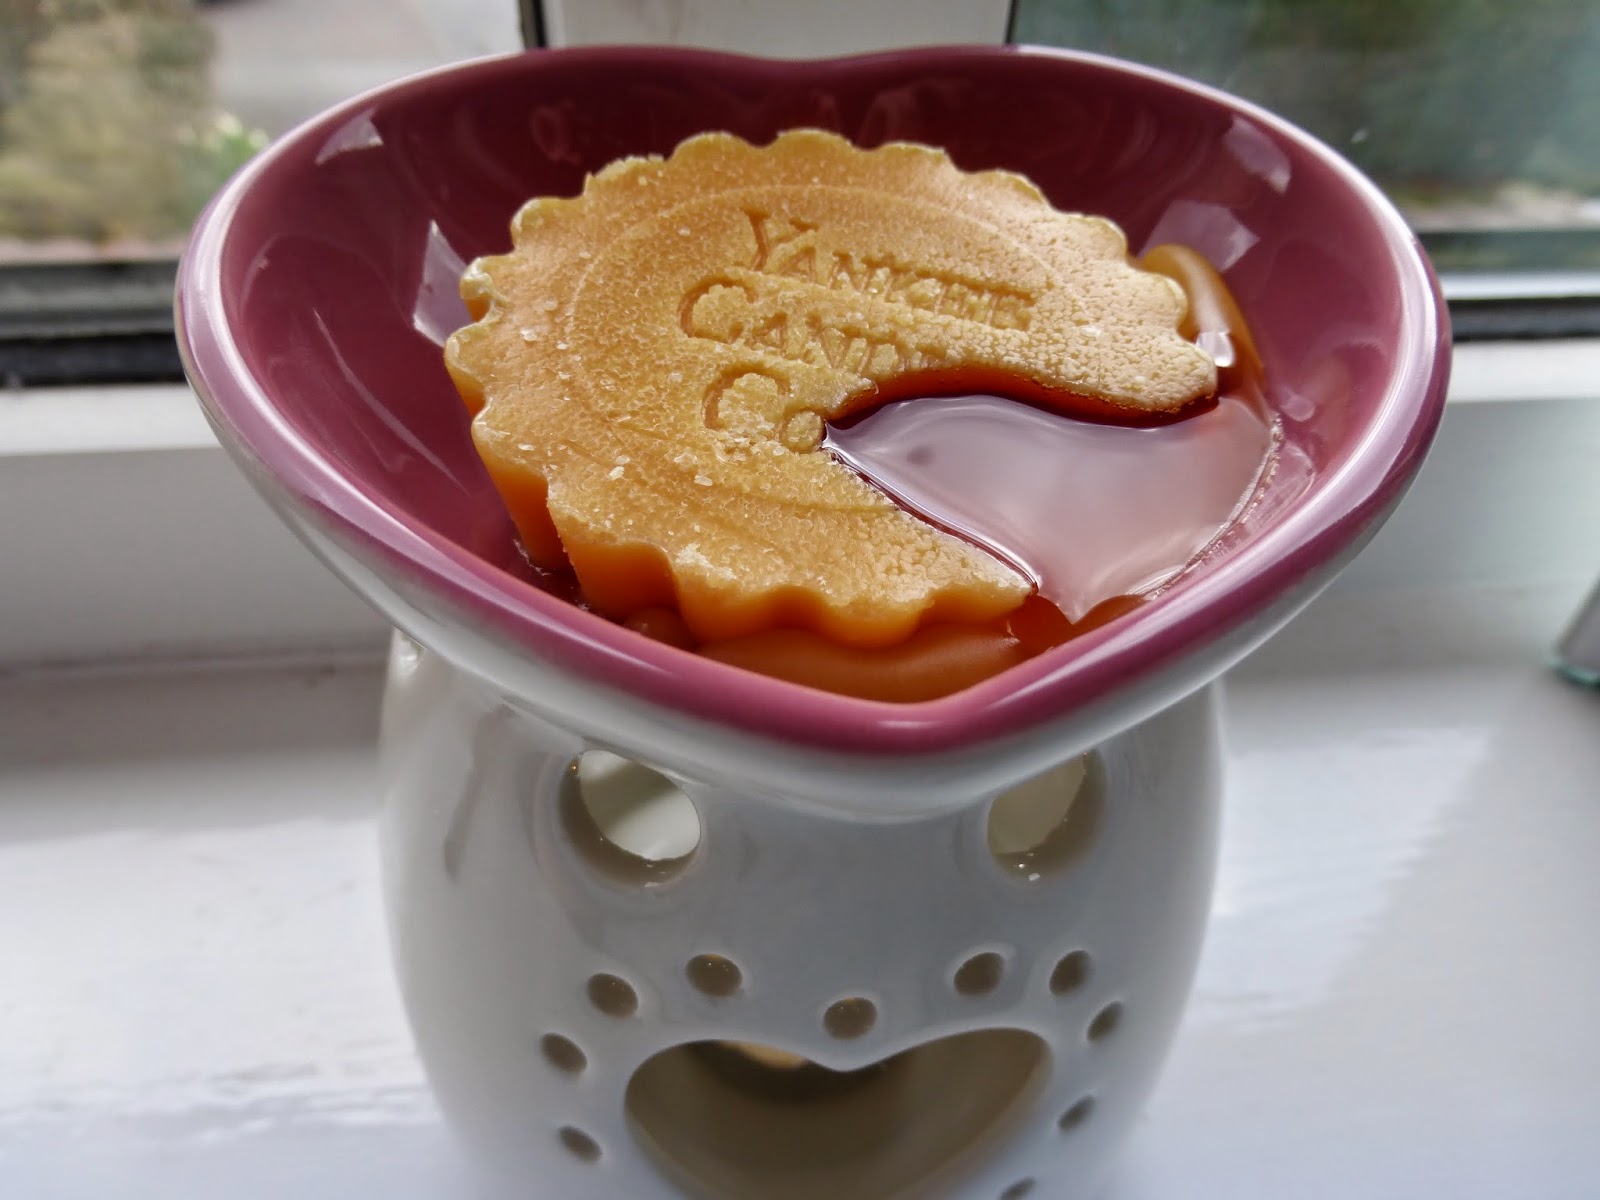 Yankee Candle Love is in the Air Melt Warmer